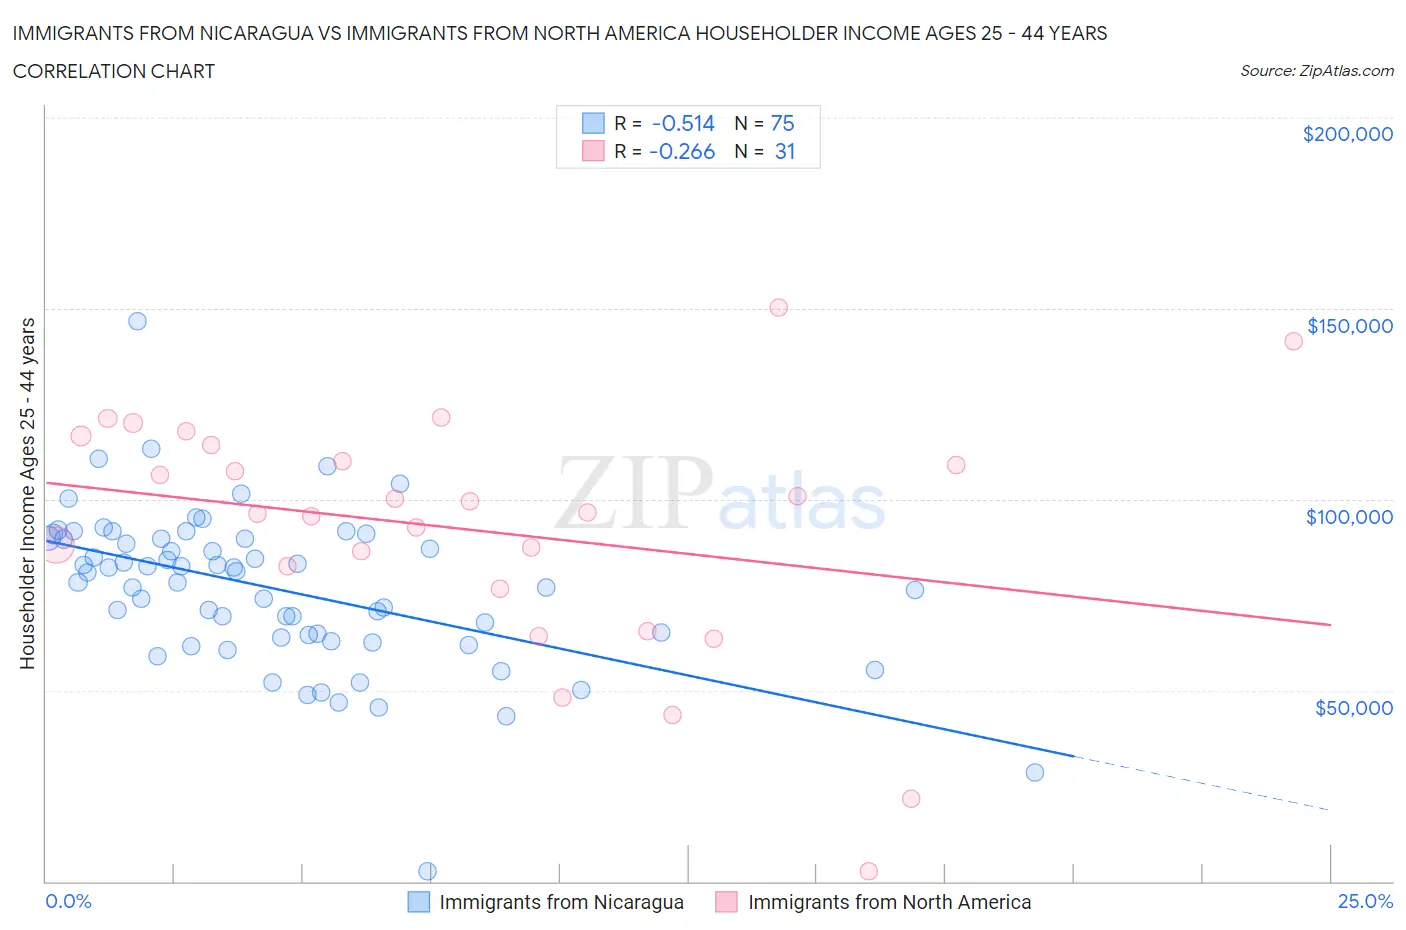 Immigrants from Nicaragua vs Immigrants from North America Householder Income Ages 25 - 44 years